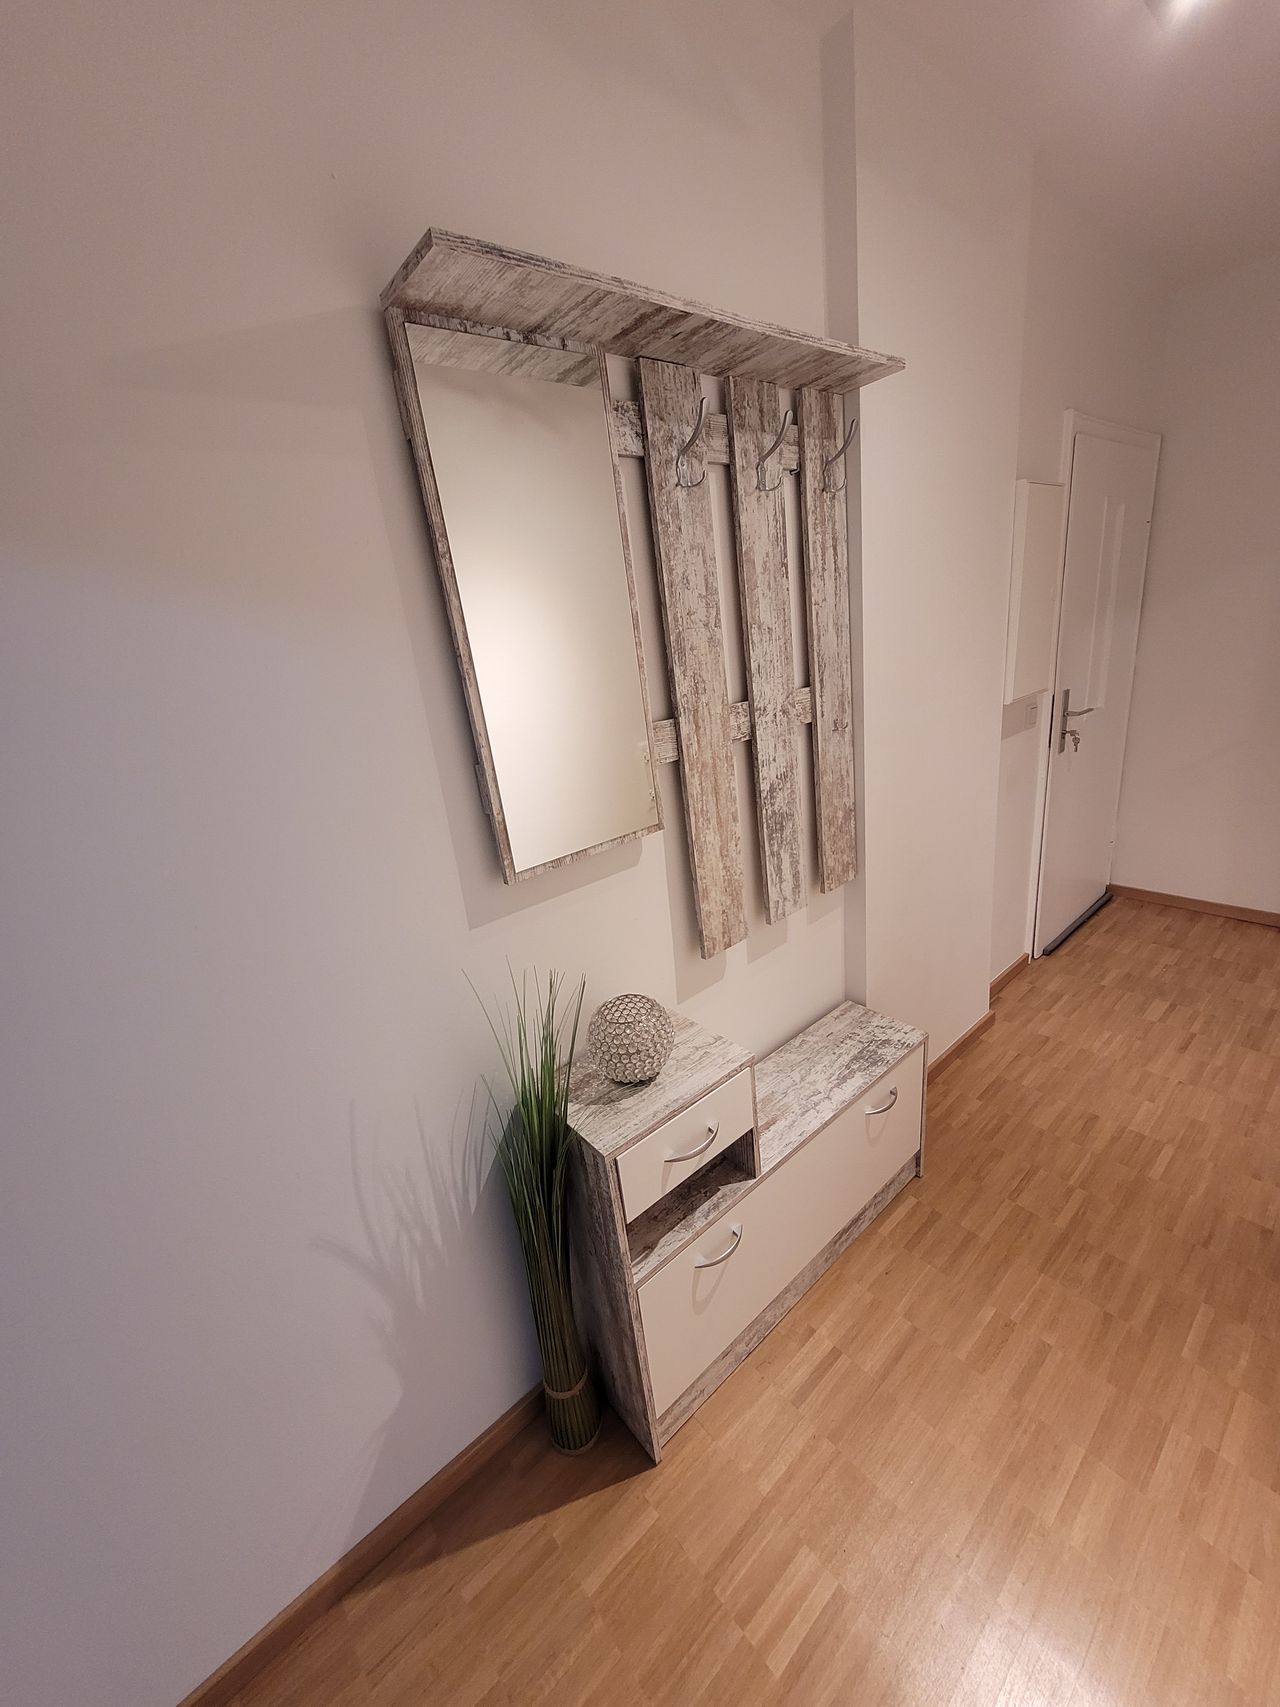 Pretty and loving apartment near the main train station, with its own washing machine and high-speed internet and smart TV